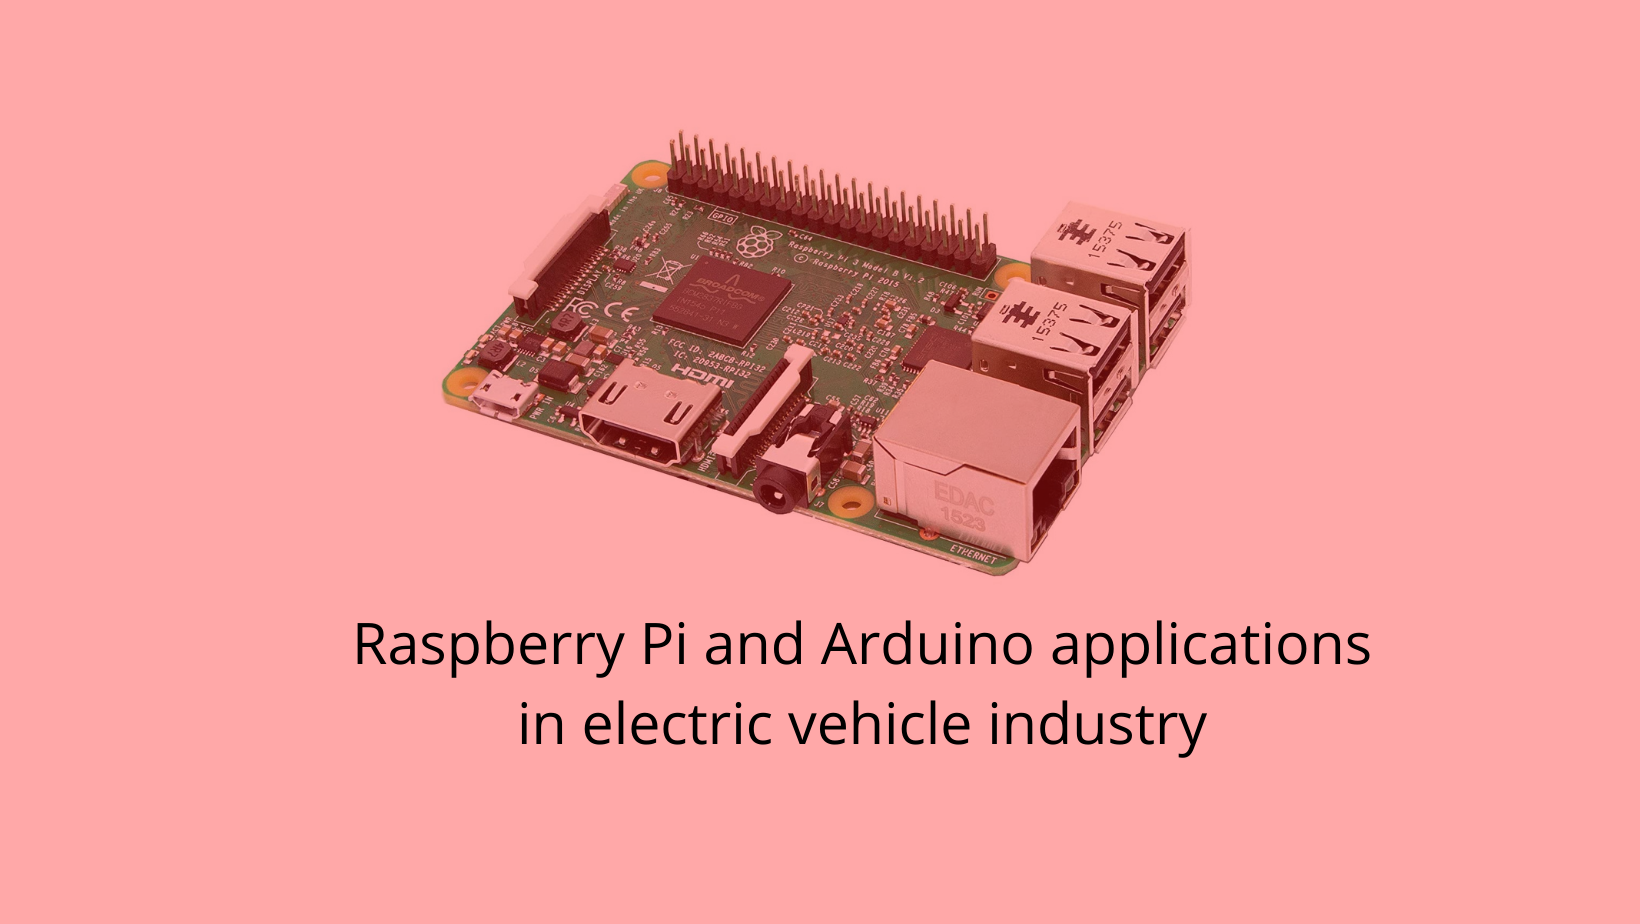 Raspberry Pi and Arduino applications in electric vehicle industry